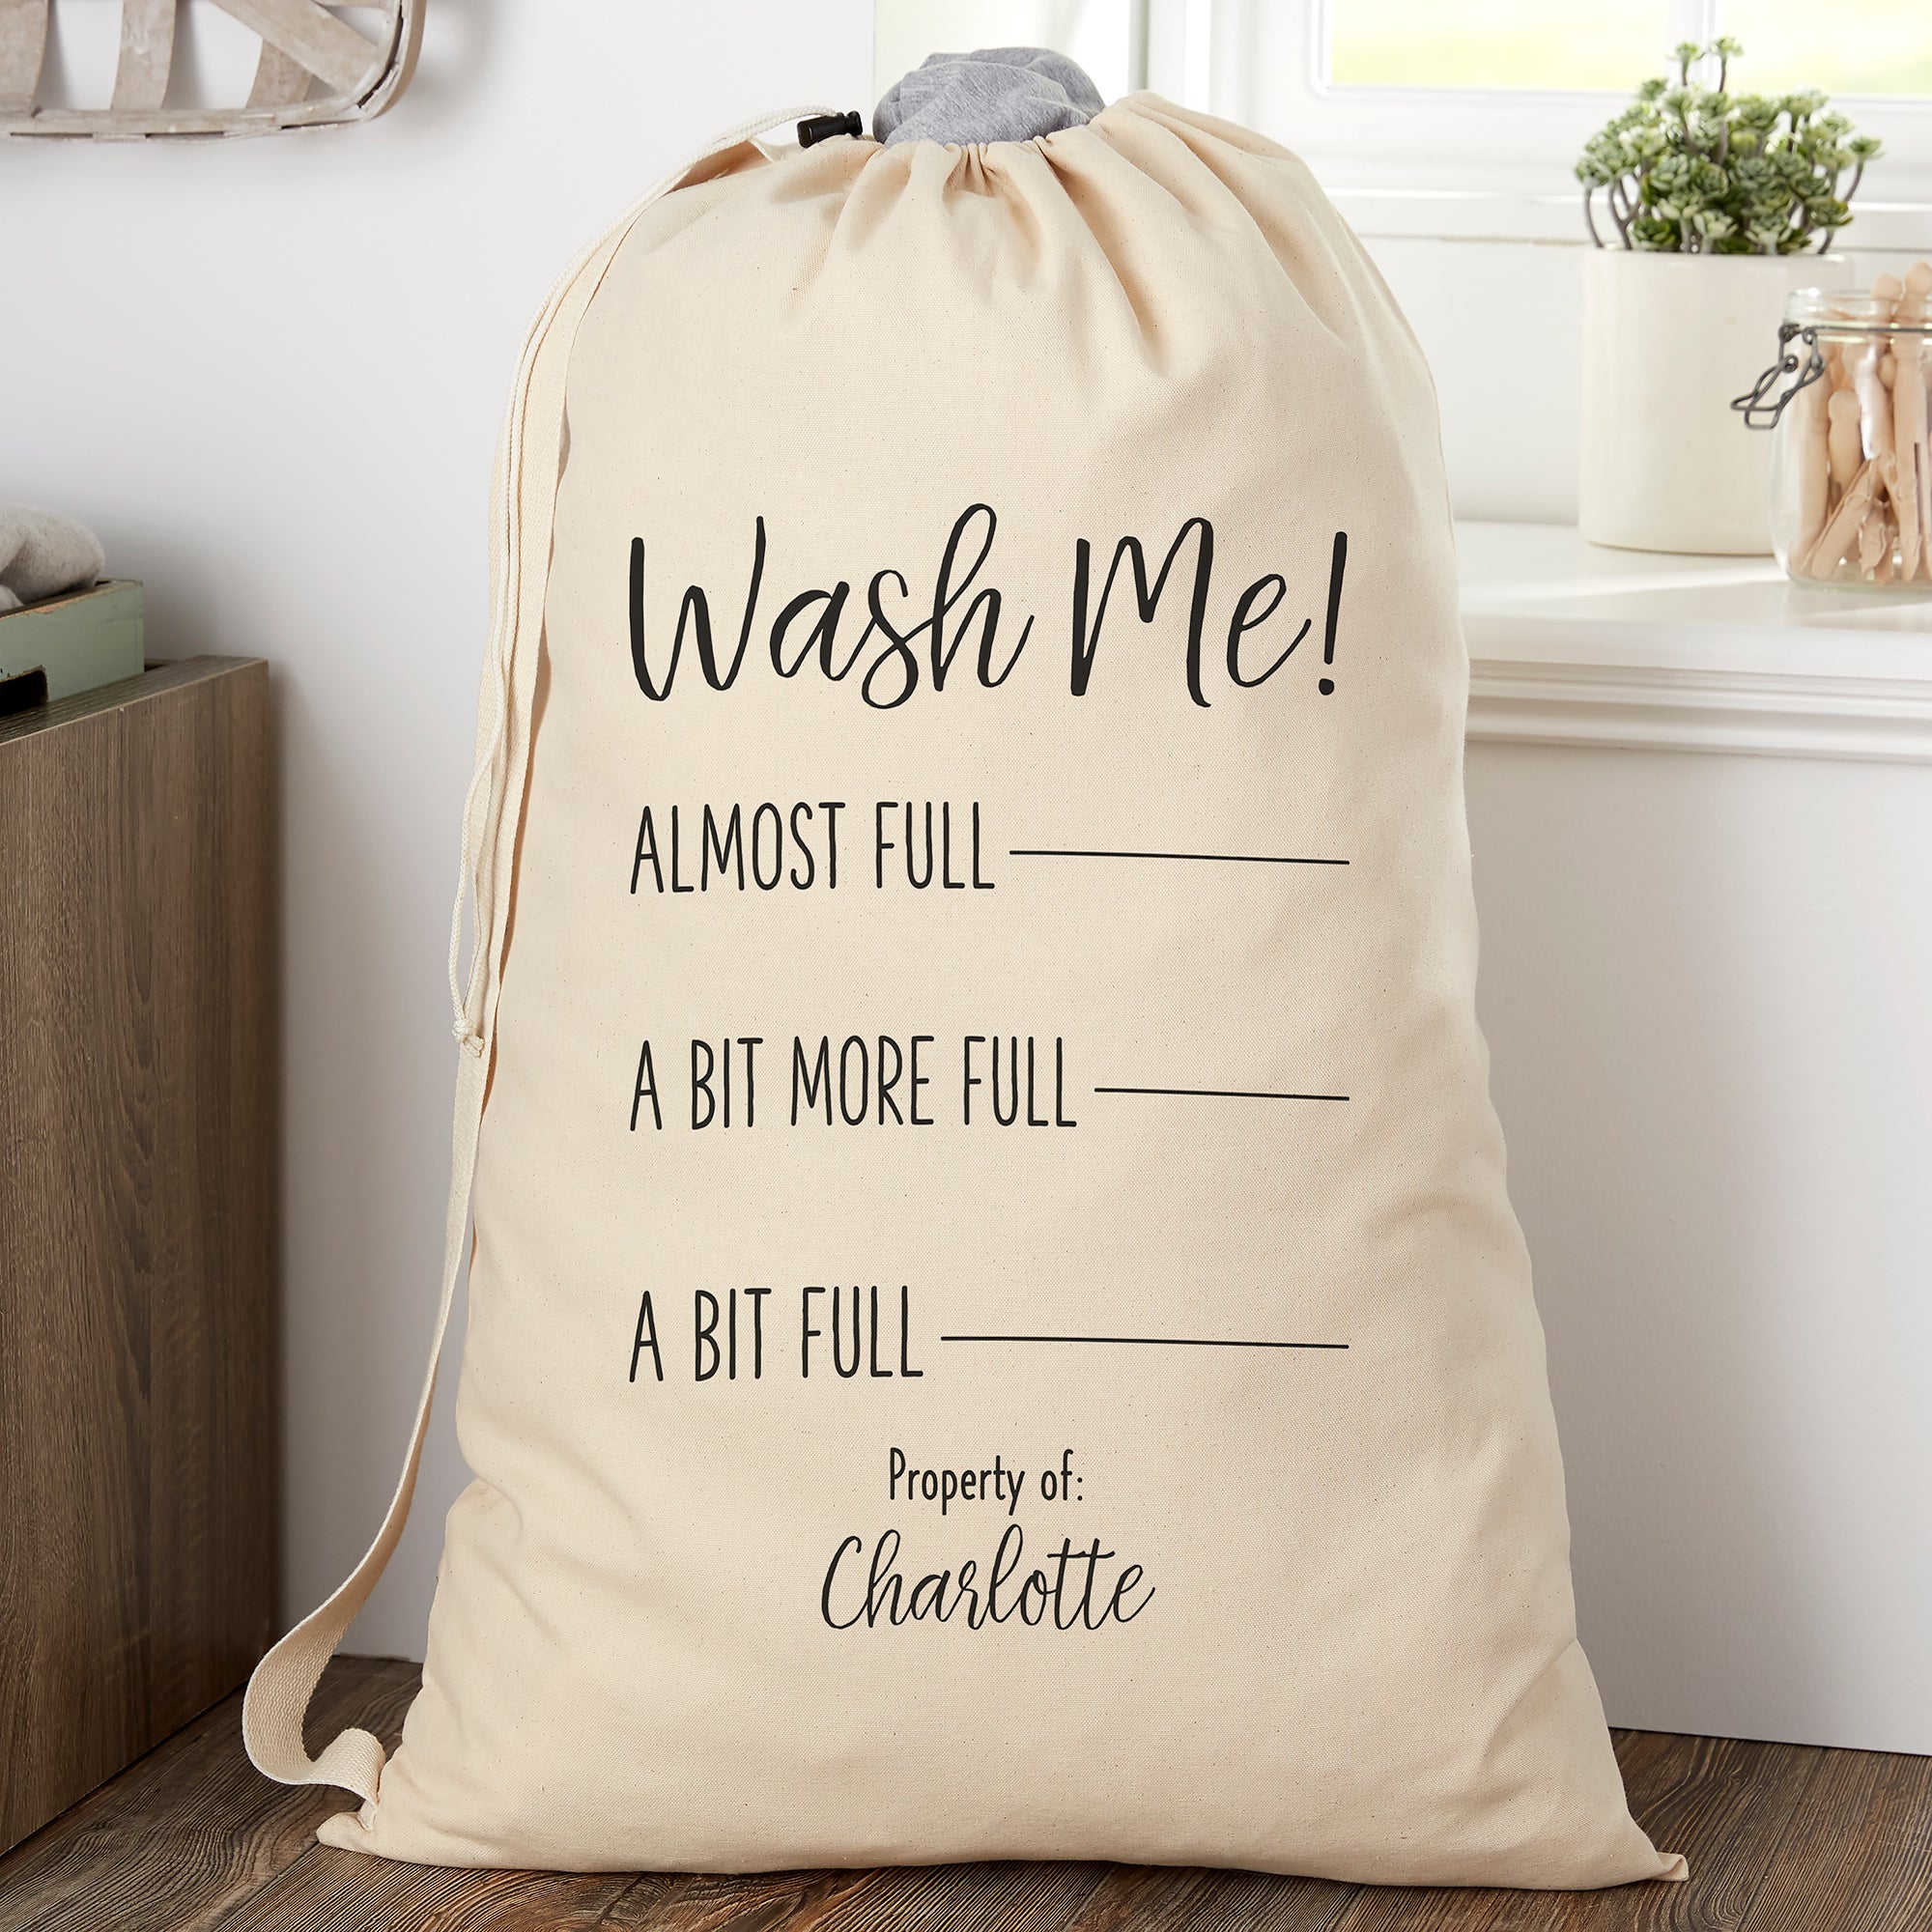 25924 - Wash Me Personalized Laundry Bag